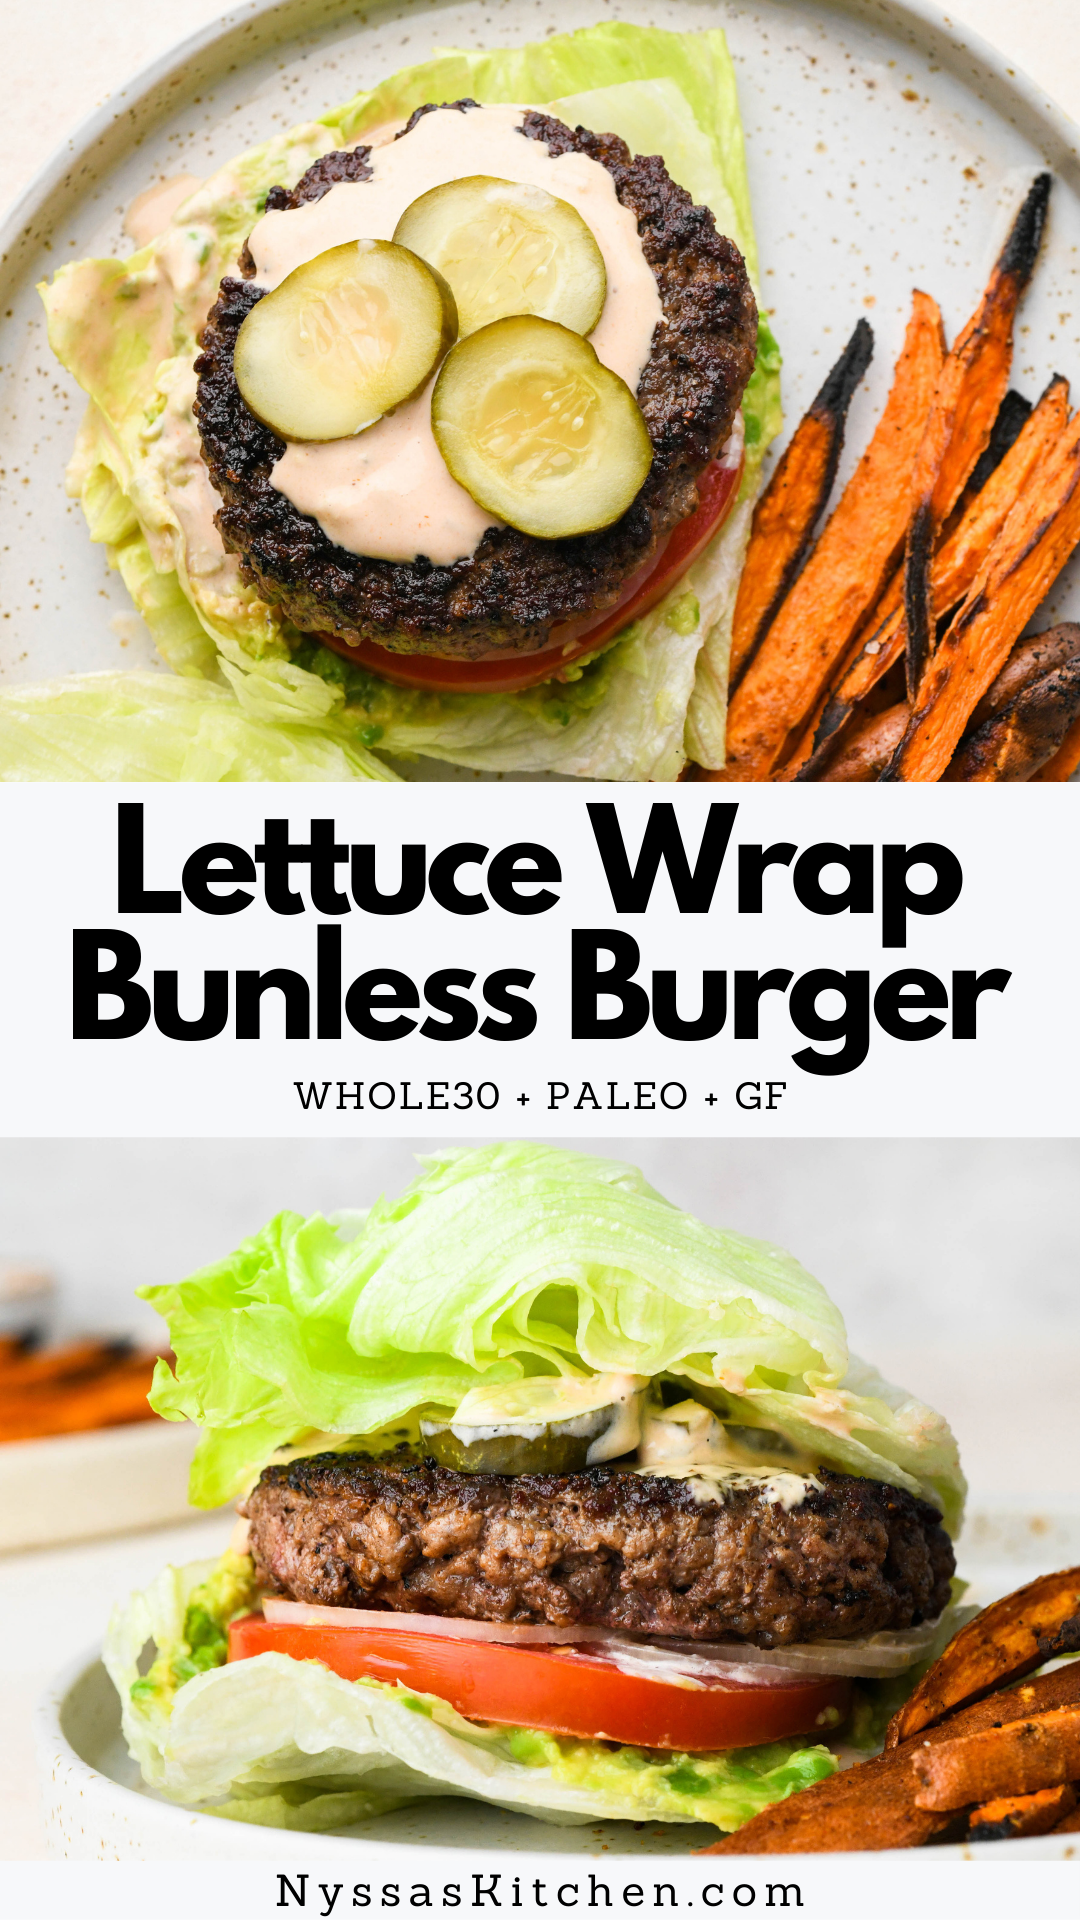 The ultimate lettuce wrap burger! Perfect for those nights when you just NEED a burger in your life. Made with seared burger patties, all the toppings, and a crave worthy burger sauce that you'll want to put on everything! Whole30, paleo friendly, gluten free, dairy free, keto, and low carb.